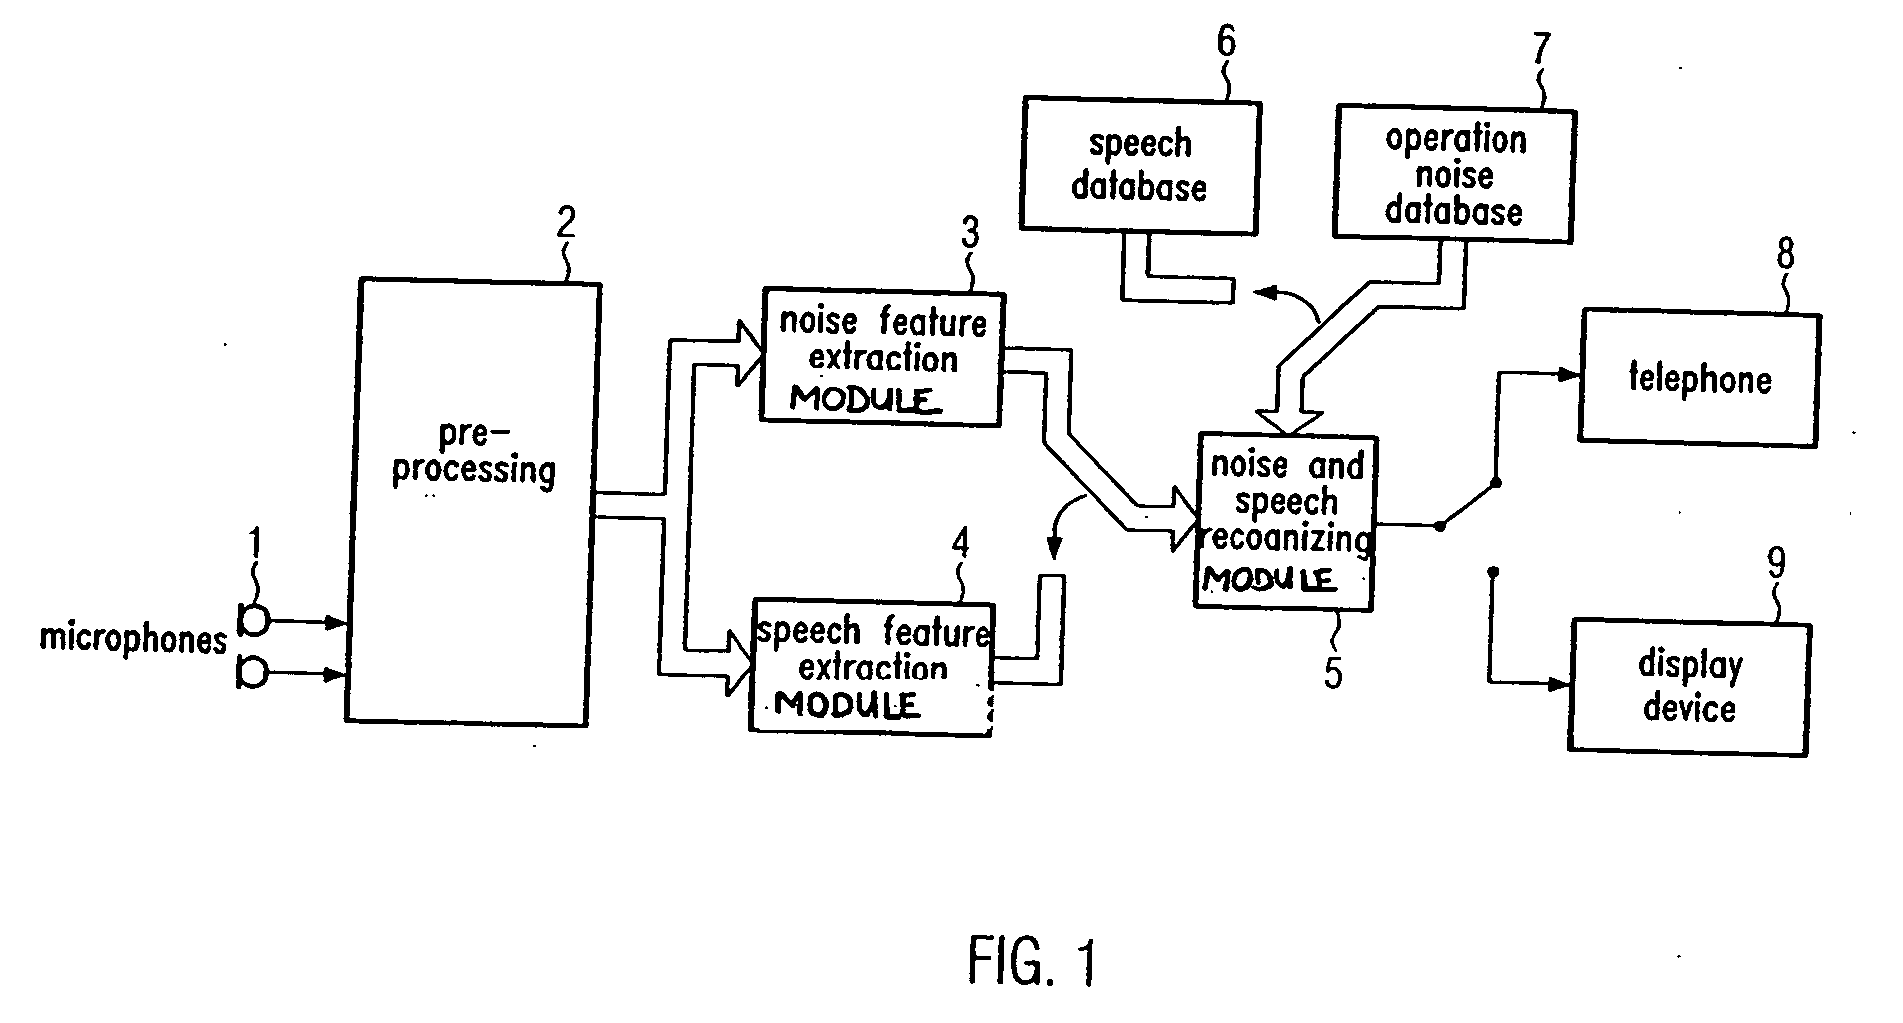 System for automatic recognition of vehicle operating noises